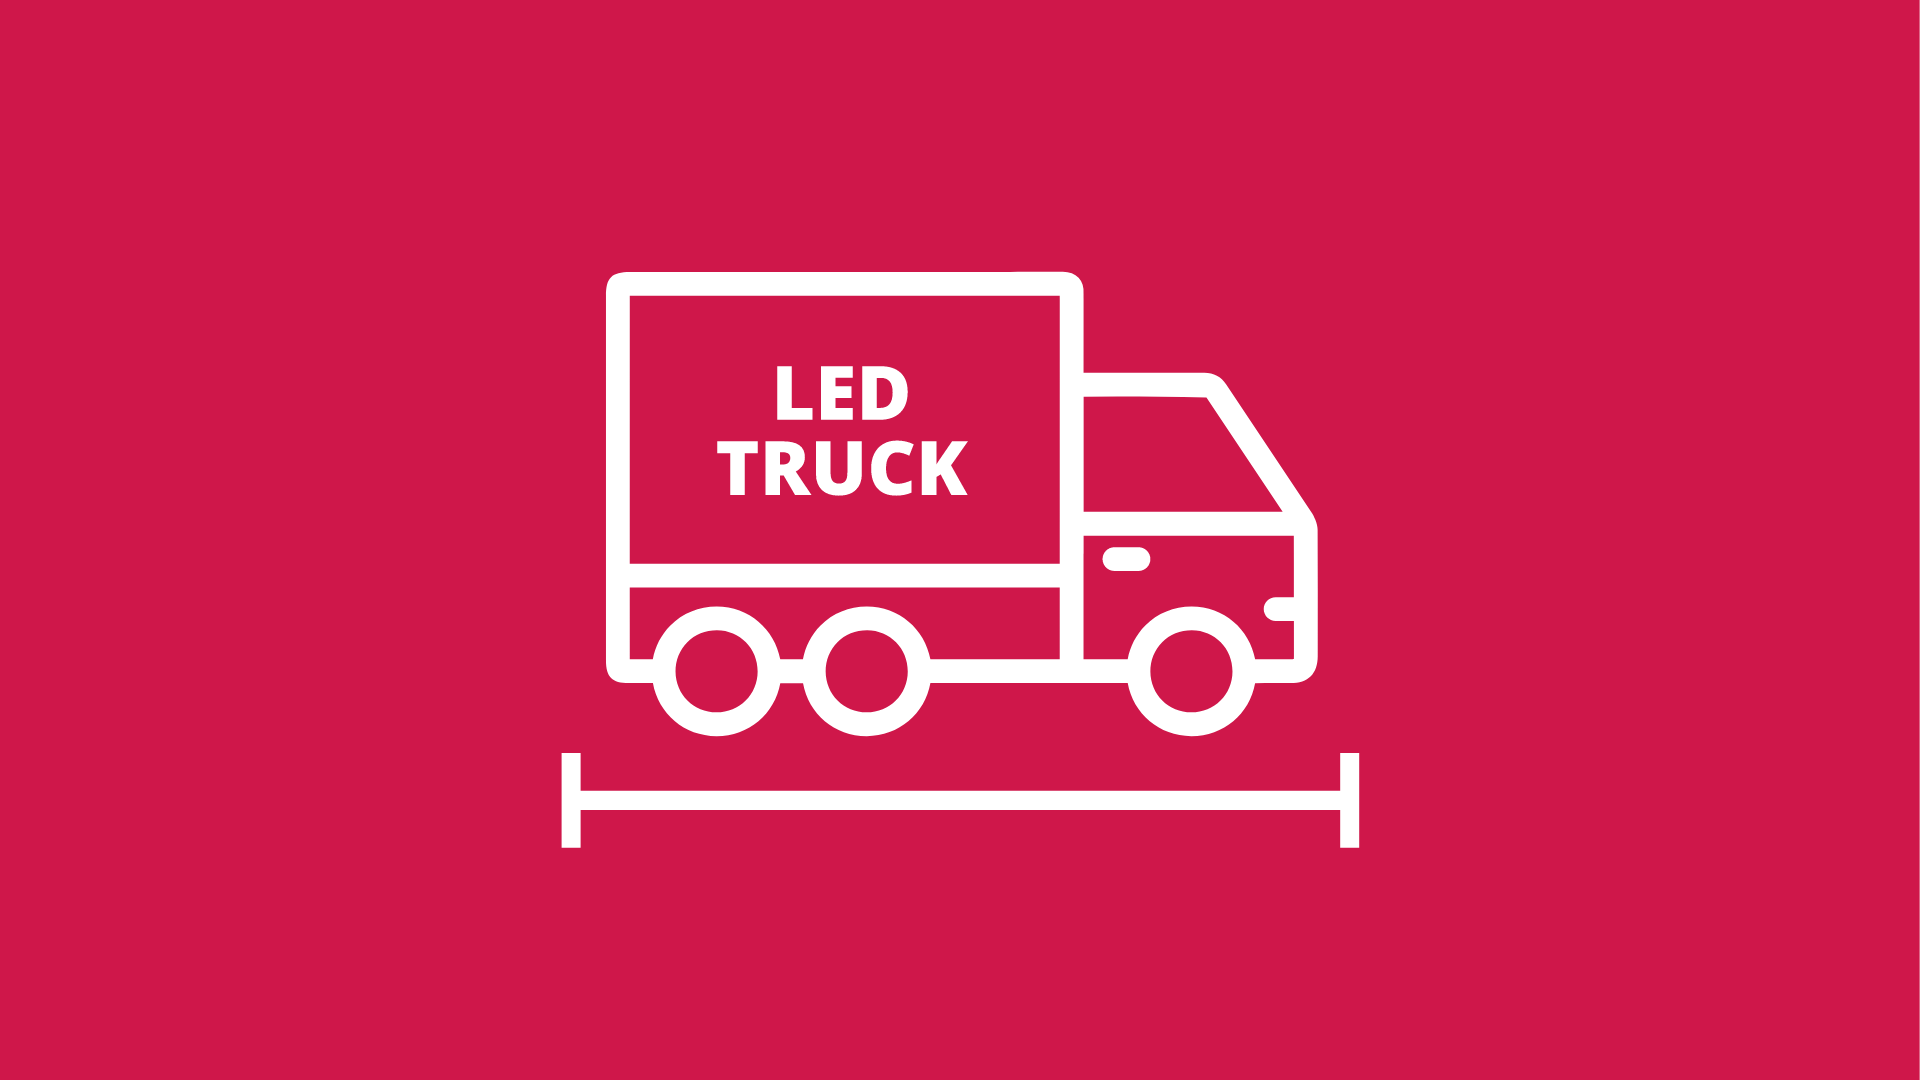 Our LED trucks and LED trailers are space saving.